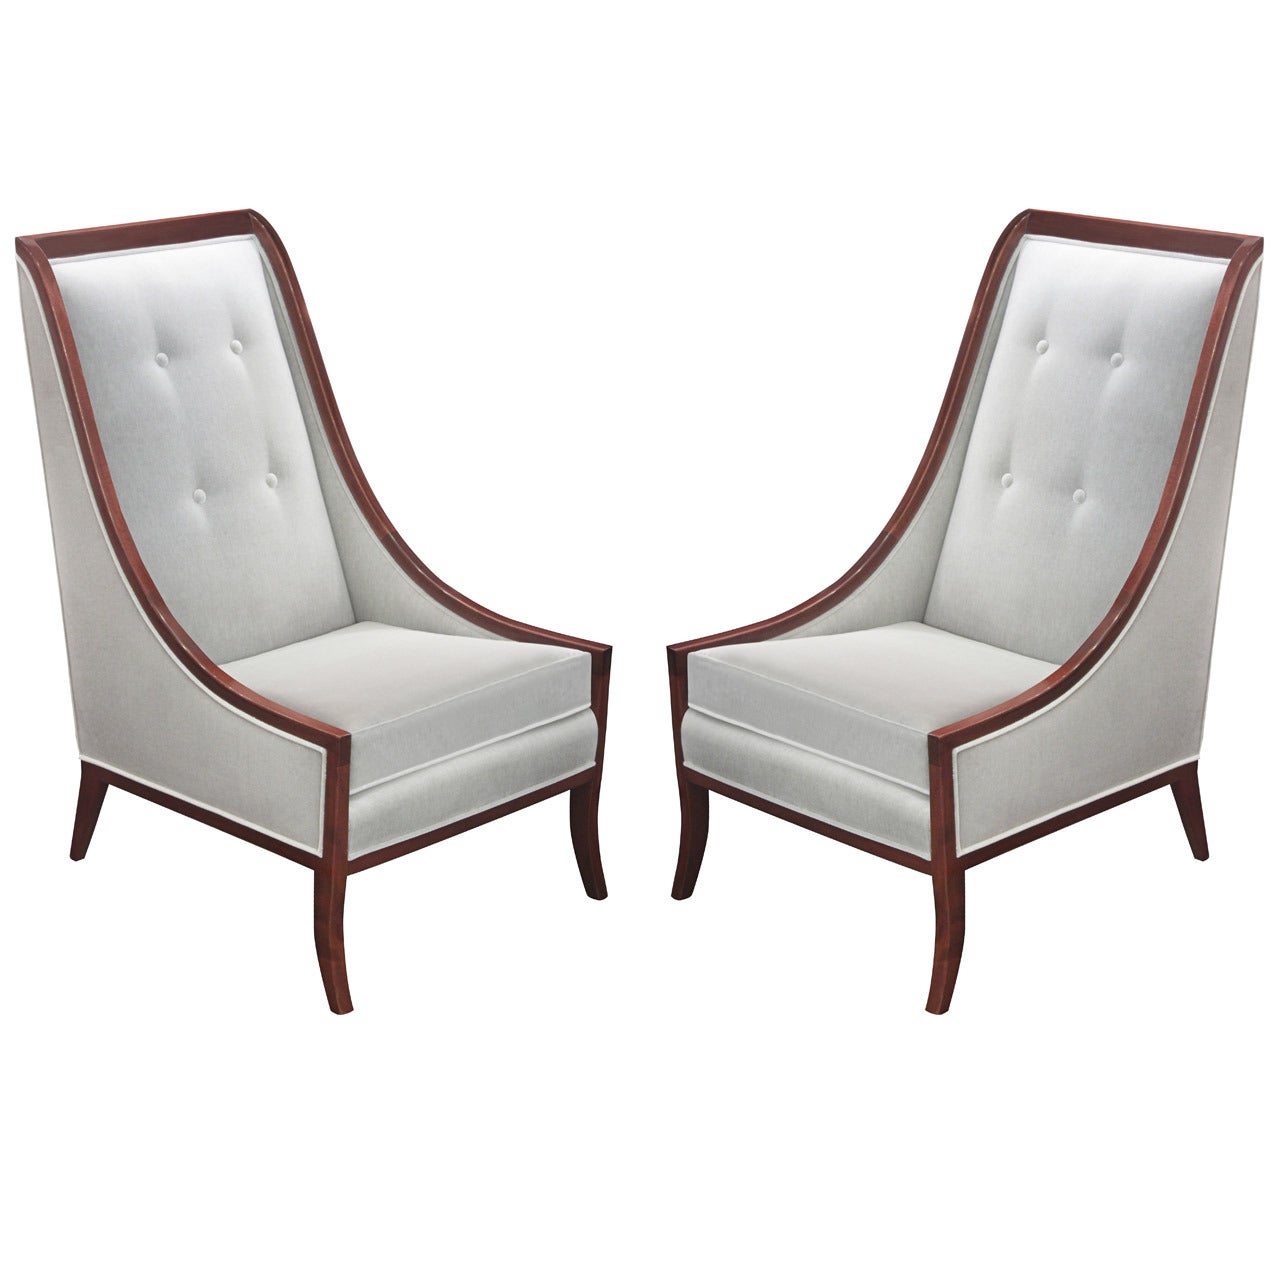 Pair of High Back Lounge Chairs Framed in Mahogany by John Widdicomb